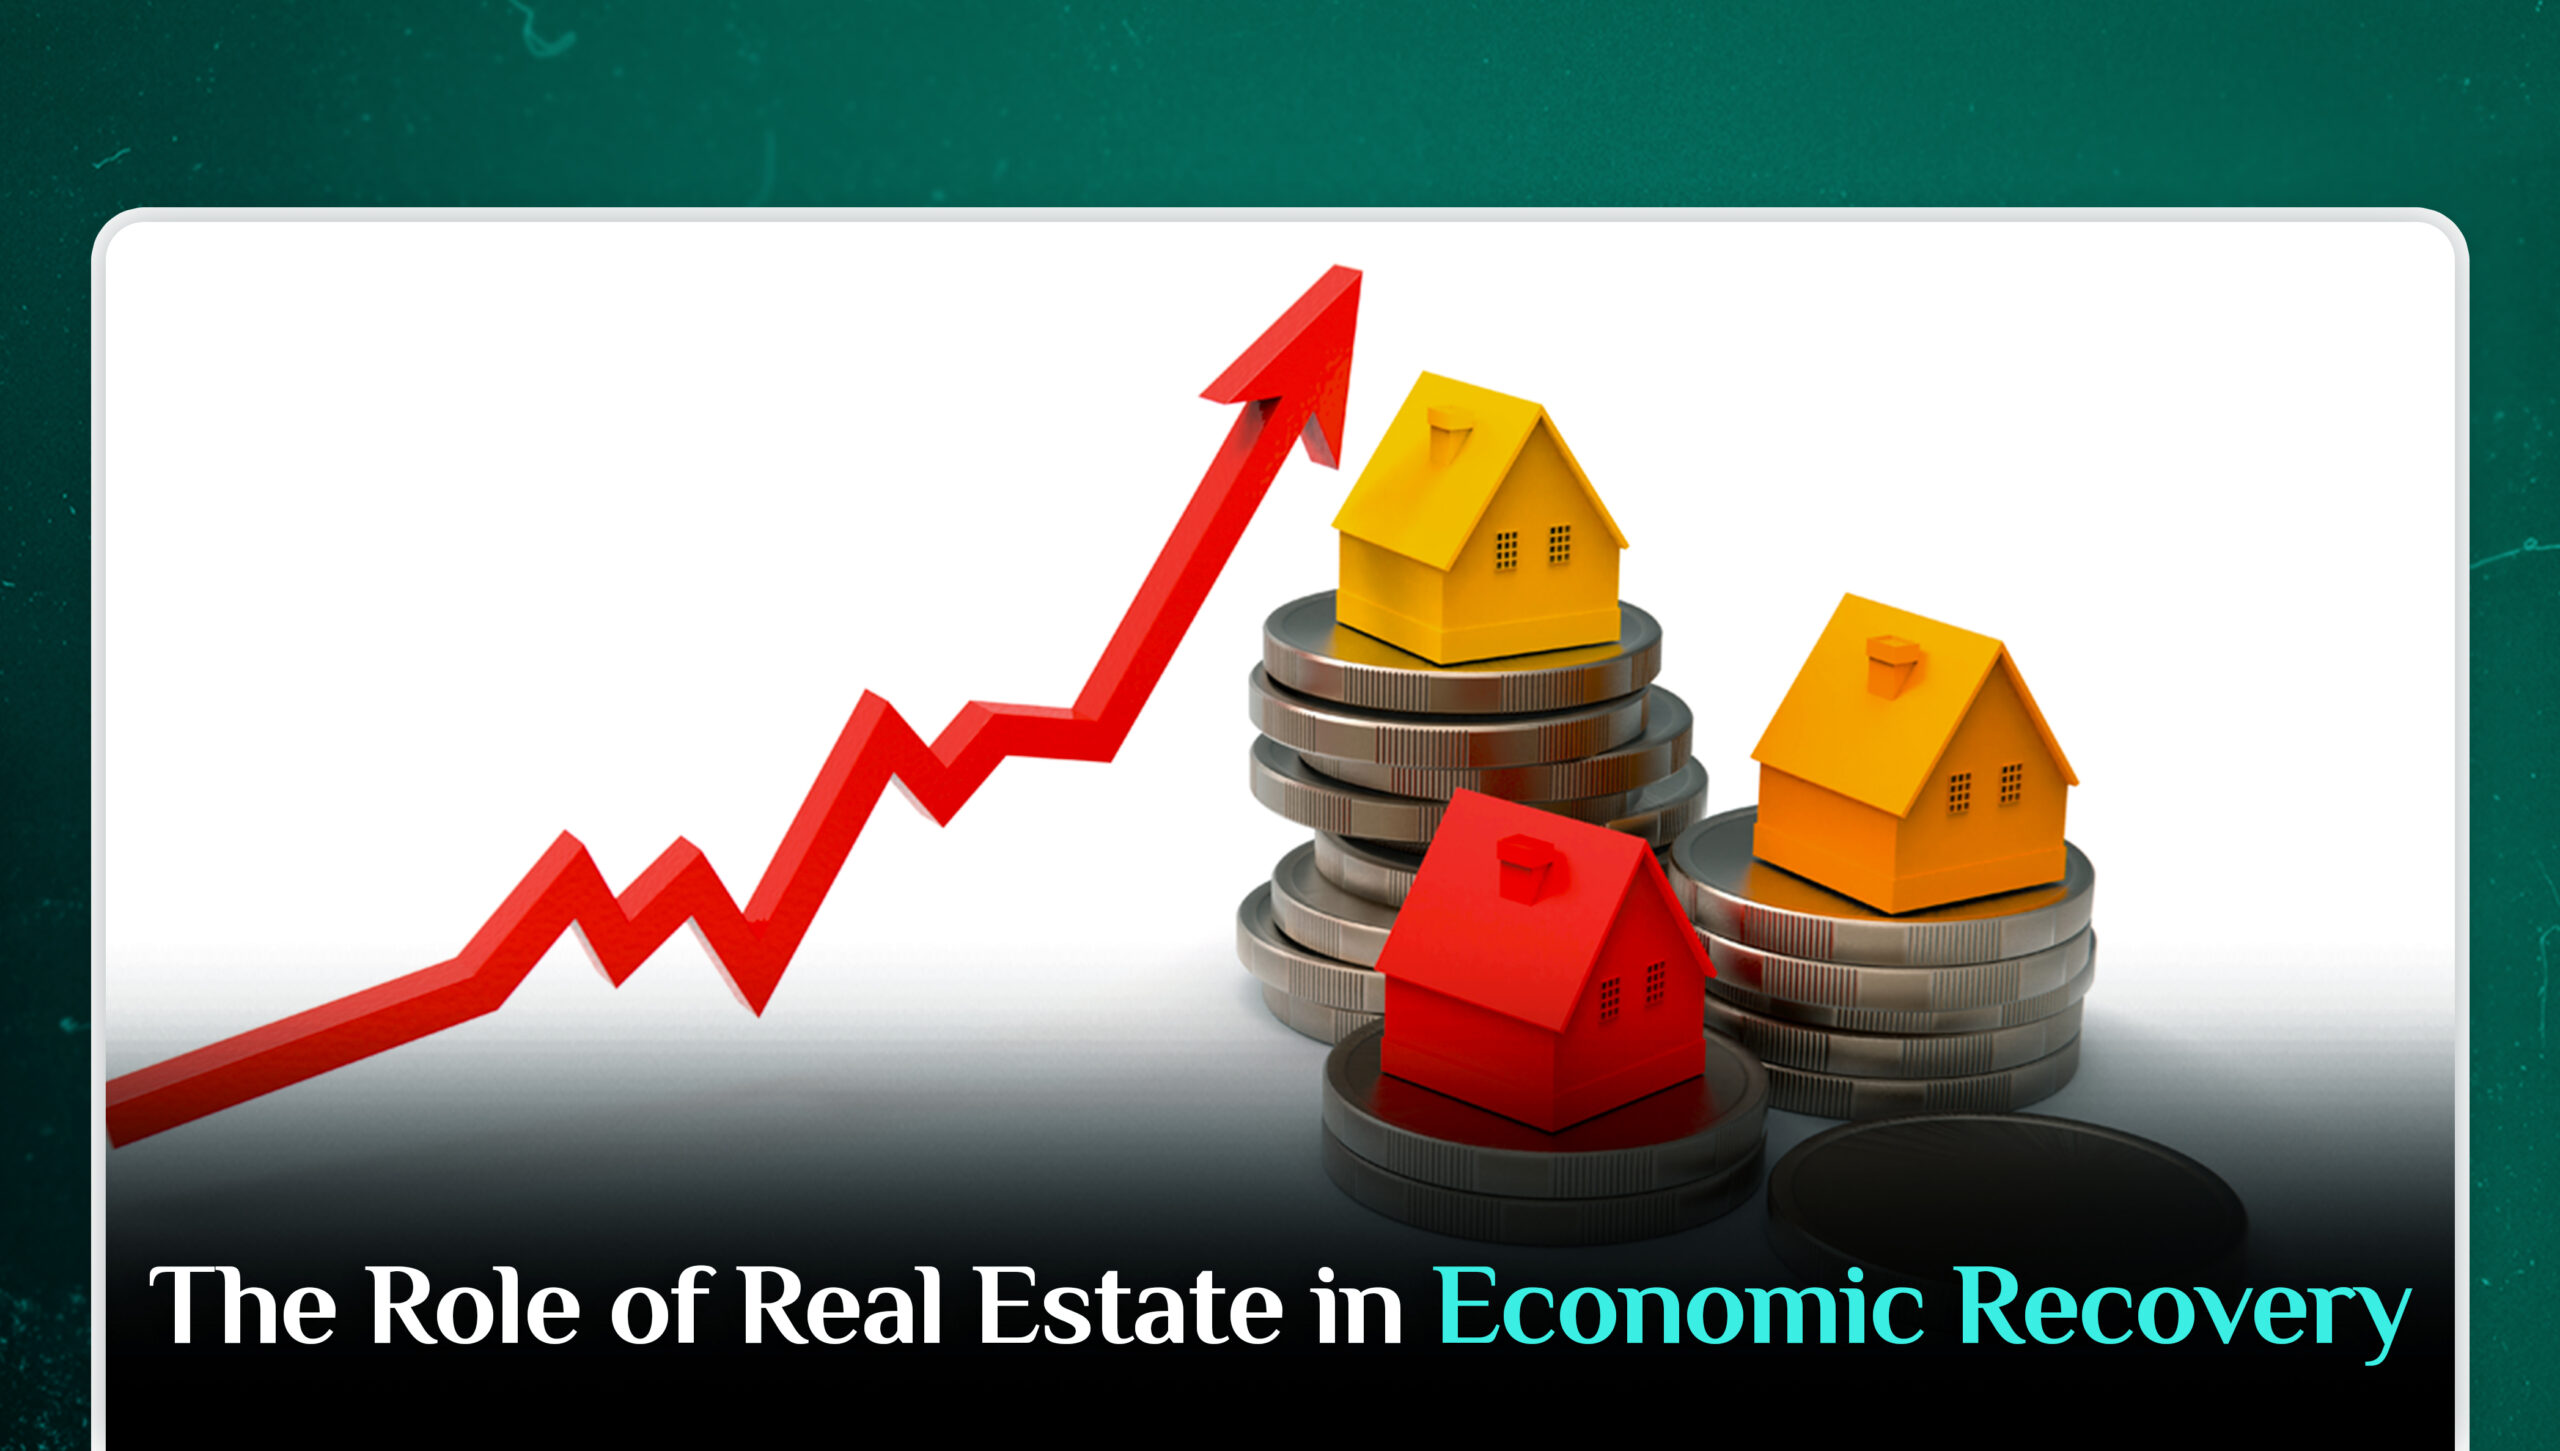 The Role of Real Estate in Economic Recovery